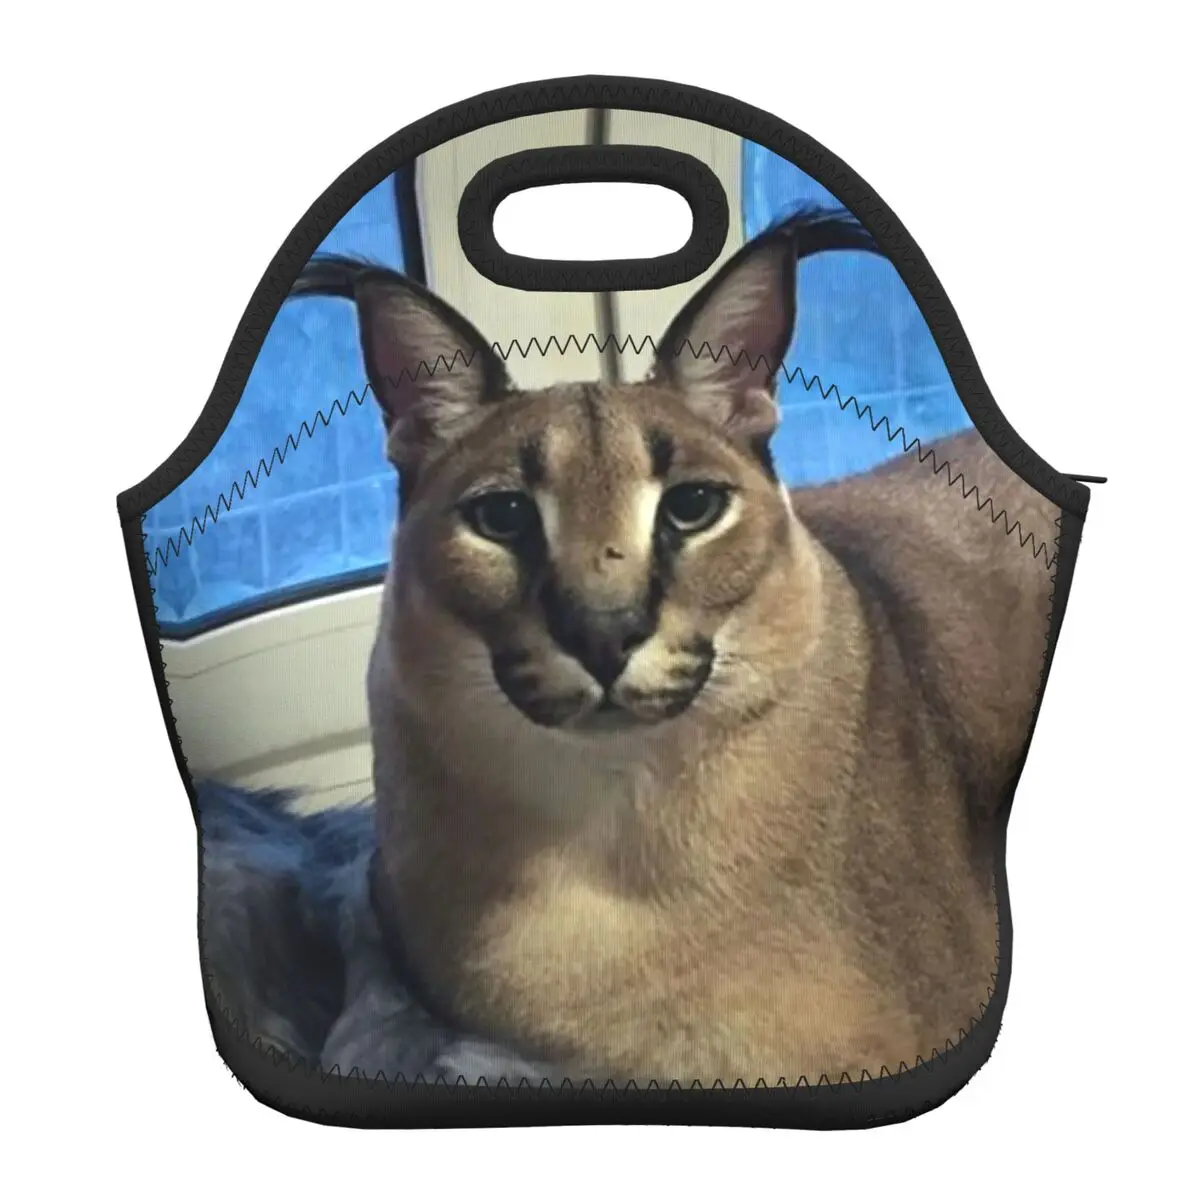 

Big Floppa Funny Meme Insulated Lunch Tote Bag for Women Men Caracal Cat Cooler Thermal Neoprene Food Lunch Box School Children